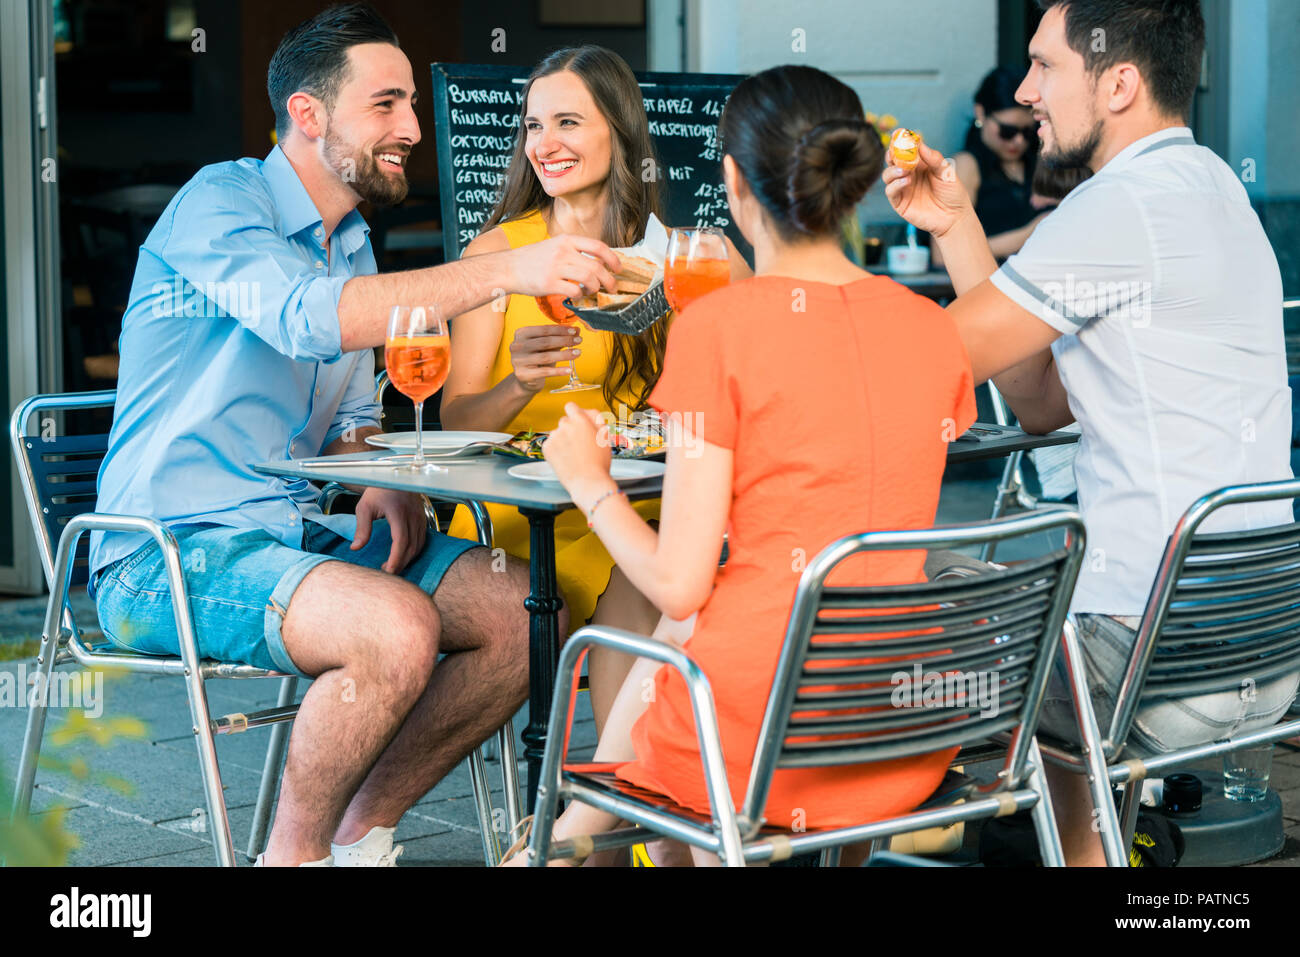 Cheerful friends toasting with a refreshing summer drink Stock Photo